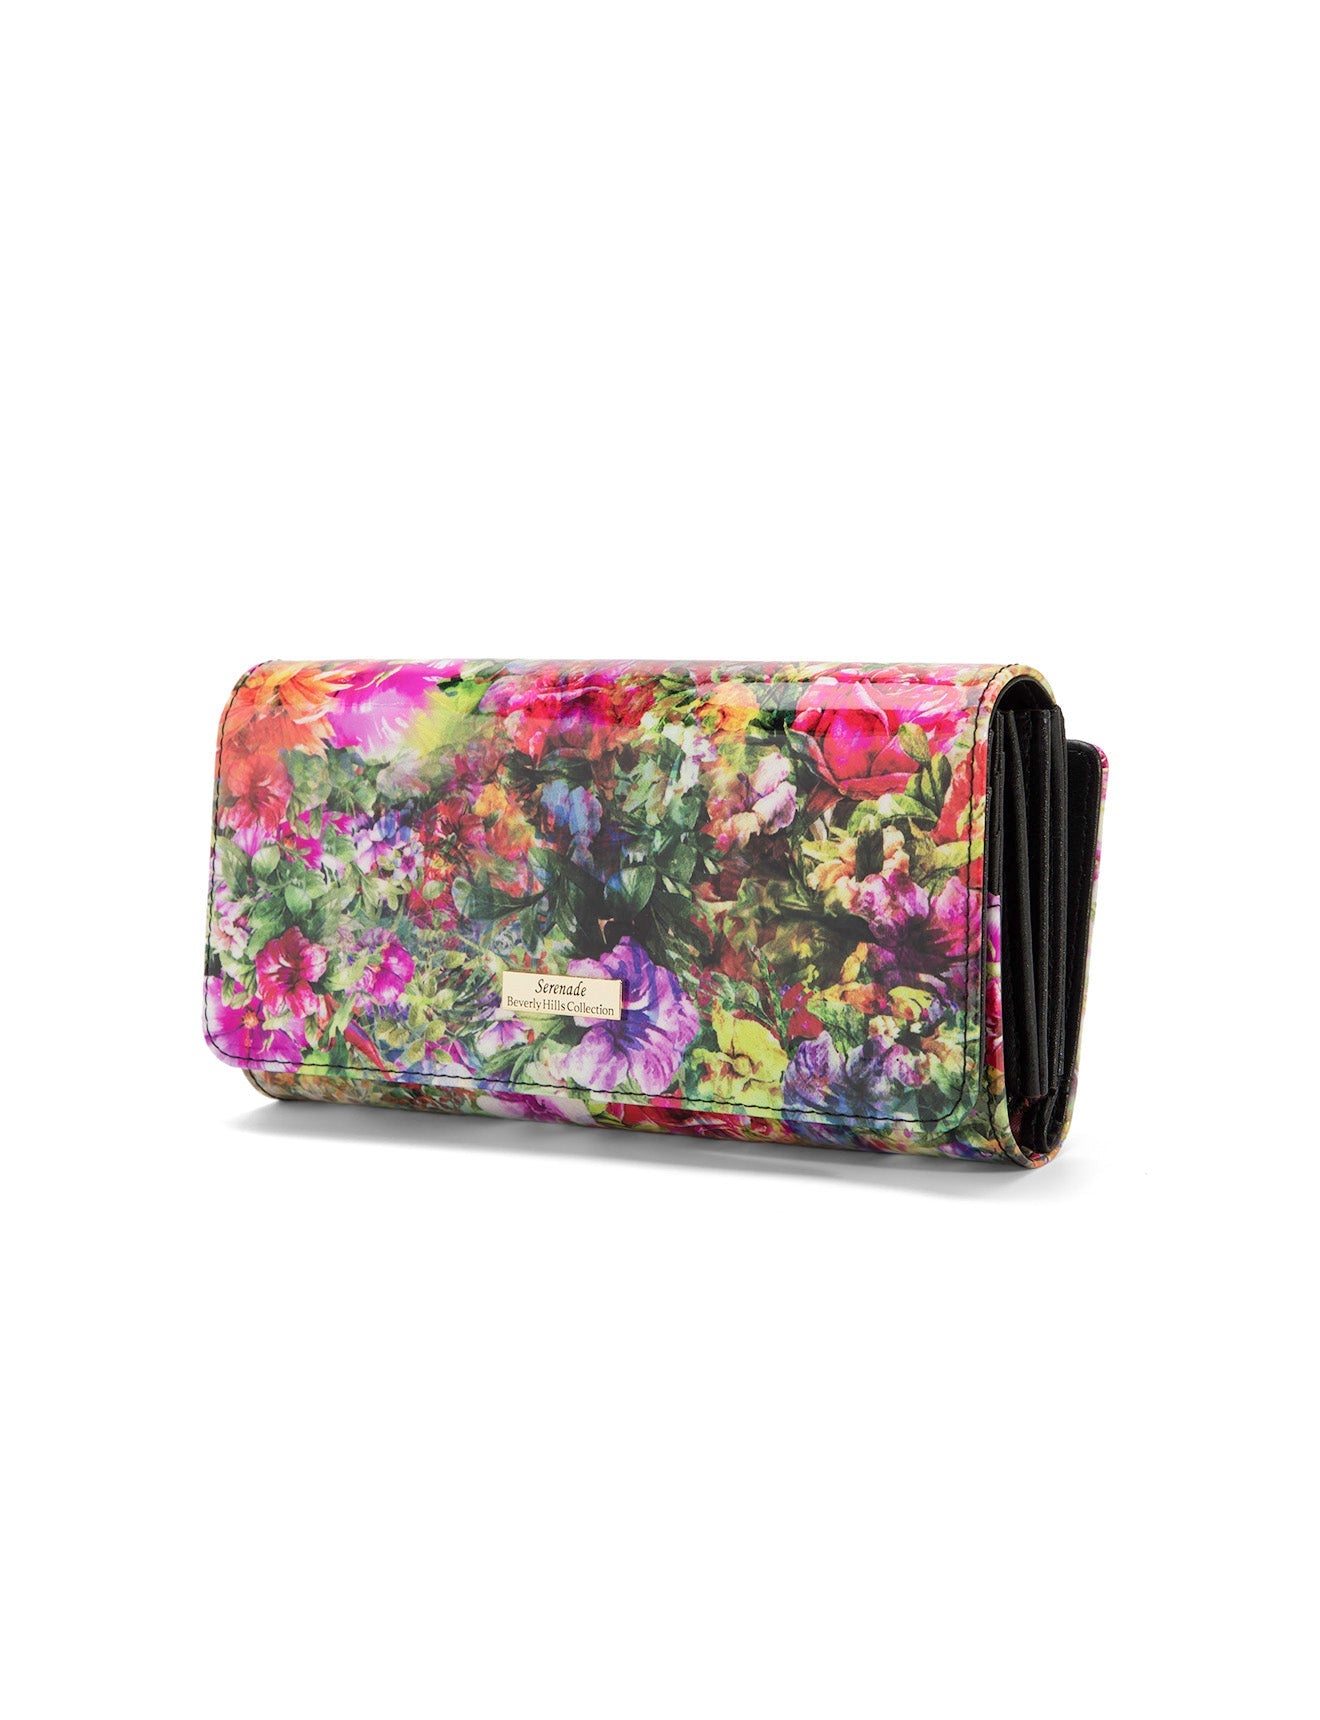 Serenade - WSN8101 Fiore Large Wallet - Floral-3